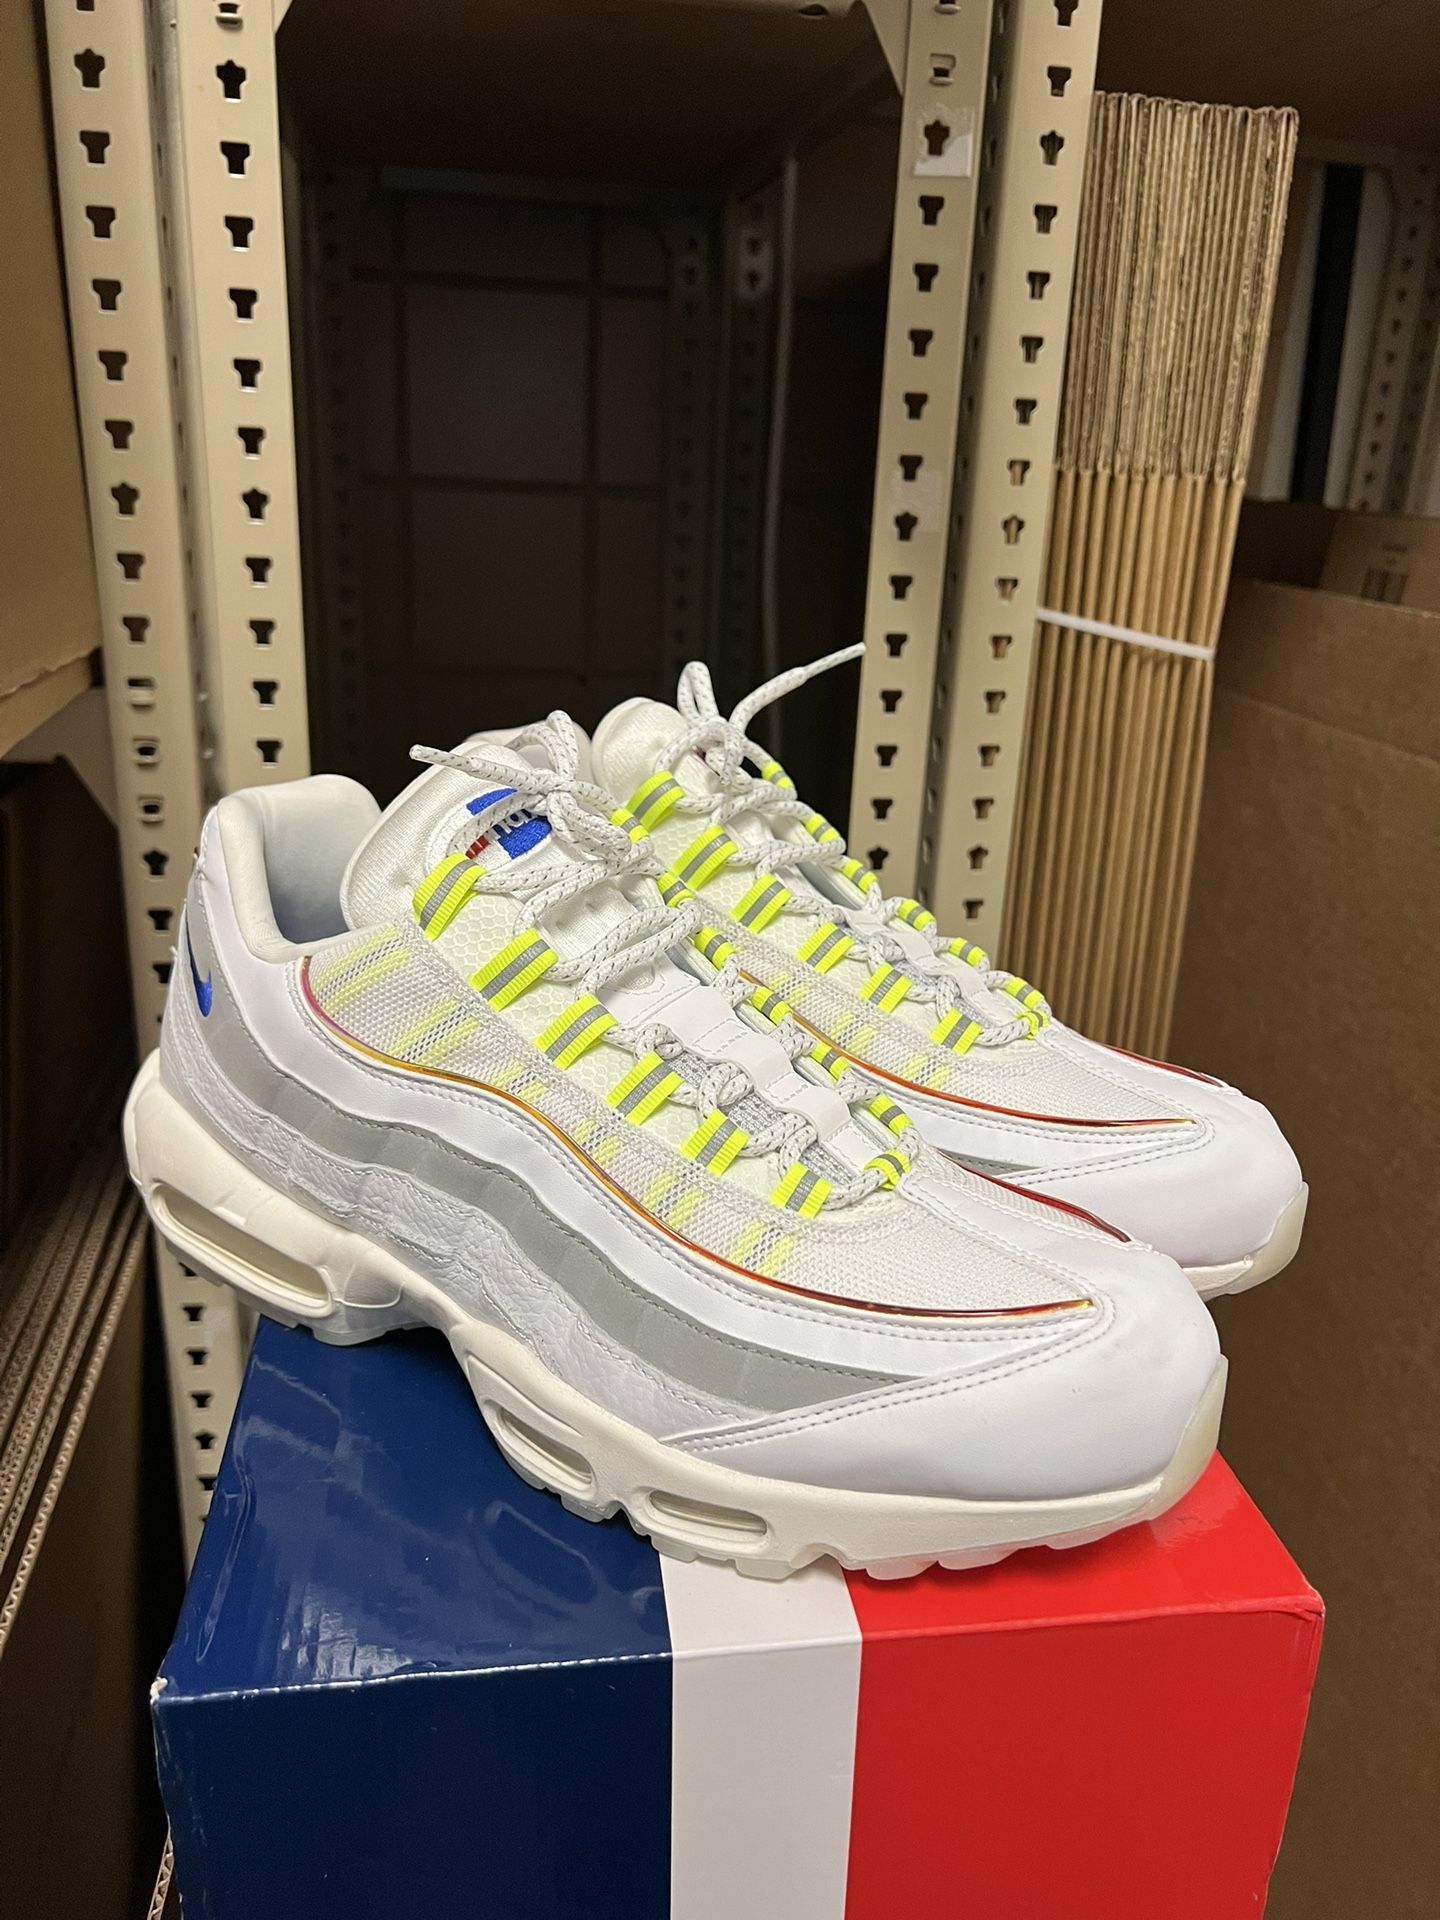 Nike Air Max 95 Size 12 Lo Mio' for Sale Las NV OfferUp